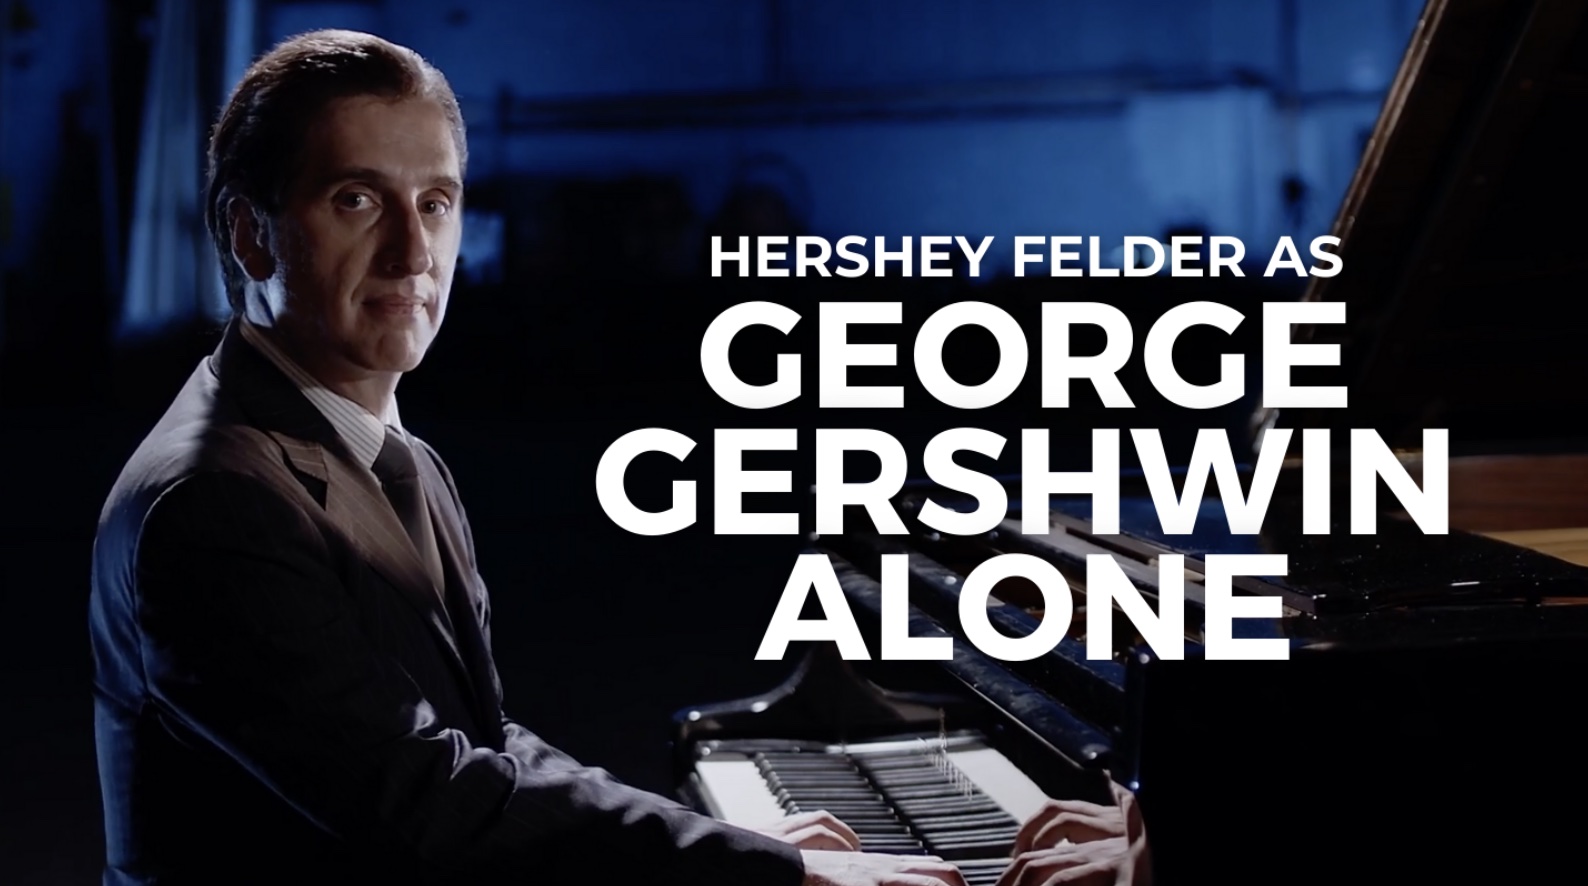 George Gershwin Alone by touring company